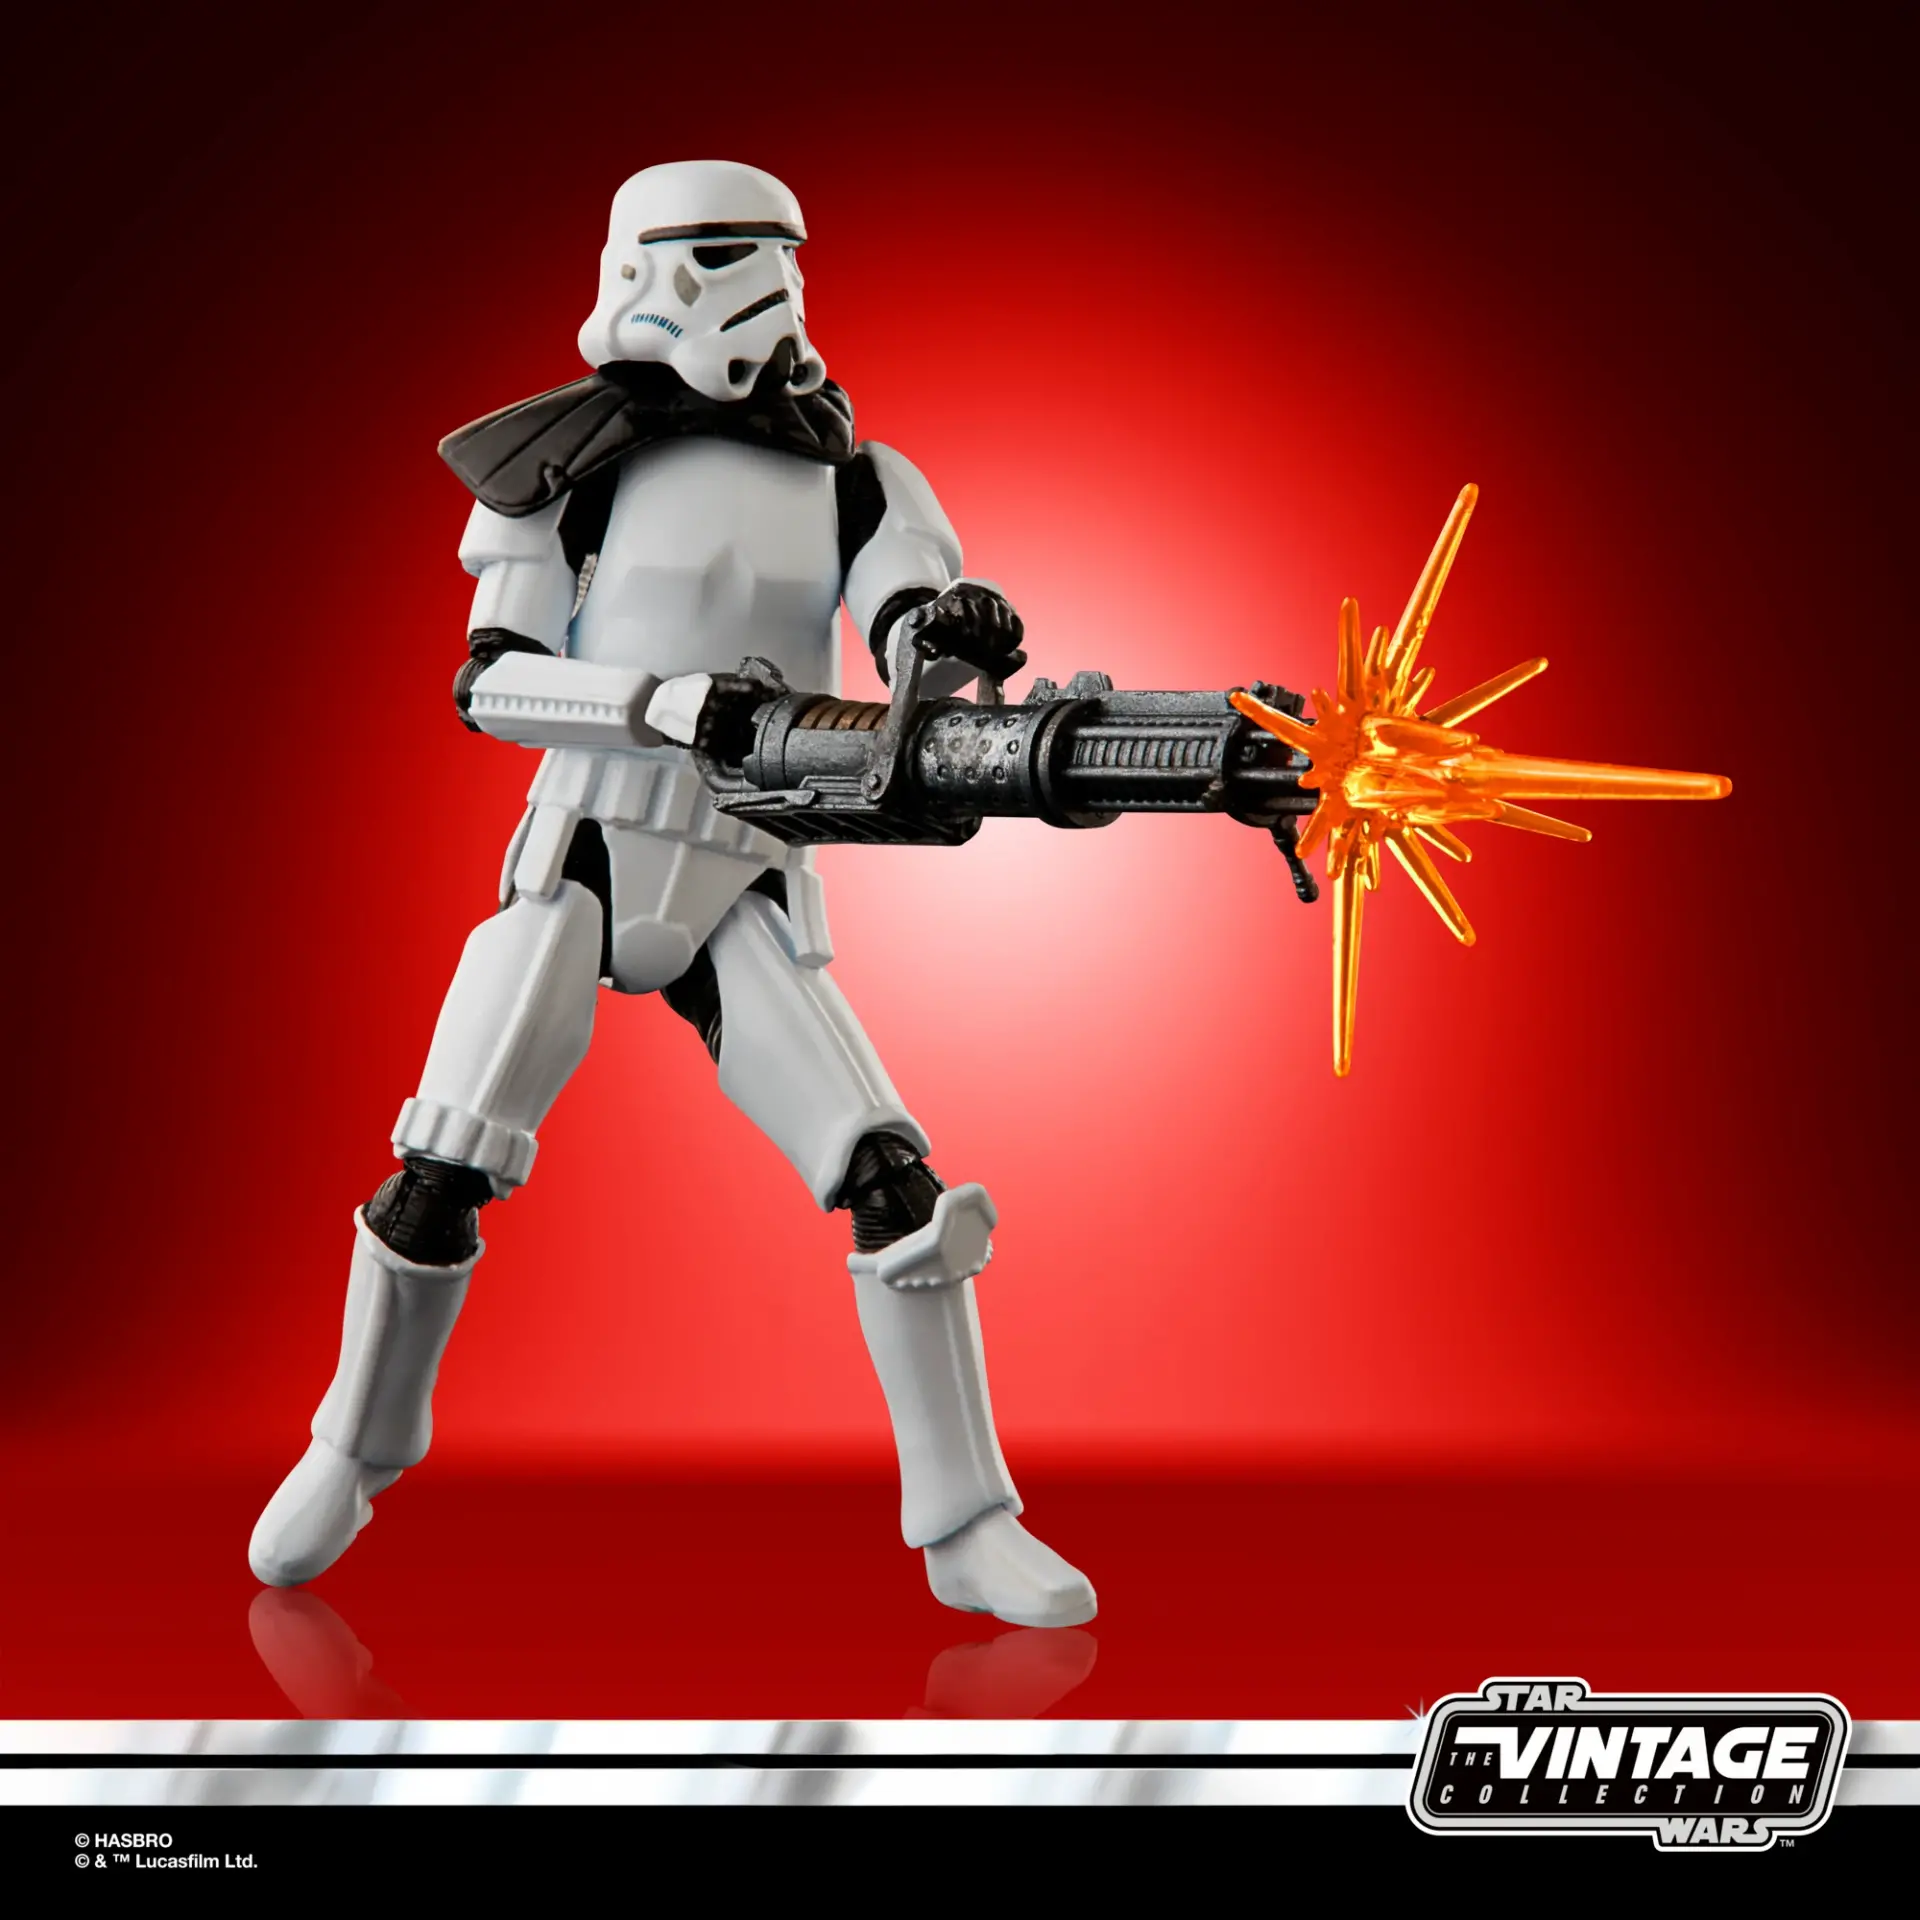 Star wars the vintage collection gaming greats heavy assault stormtrooper jawascave 4